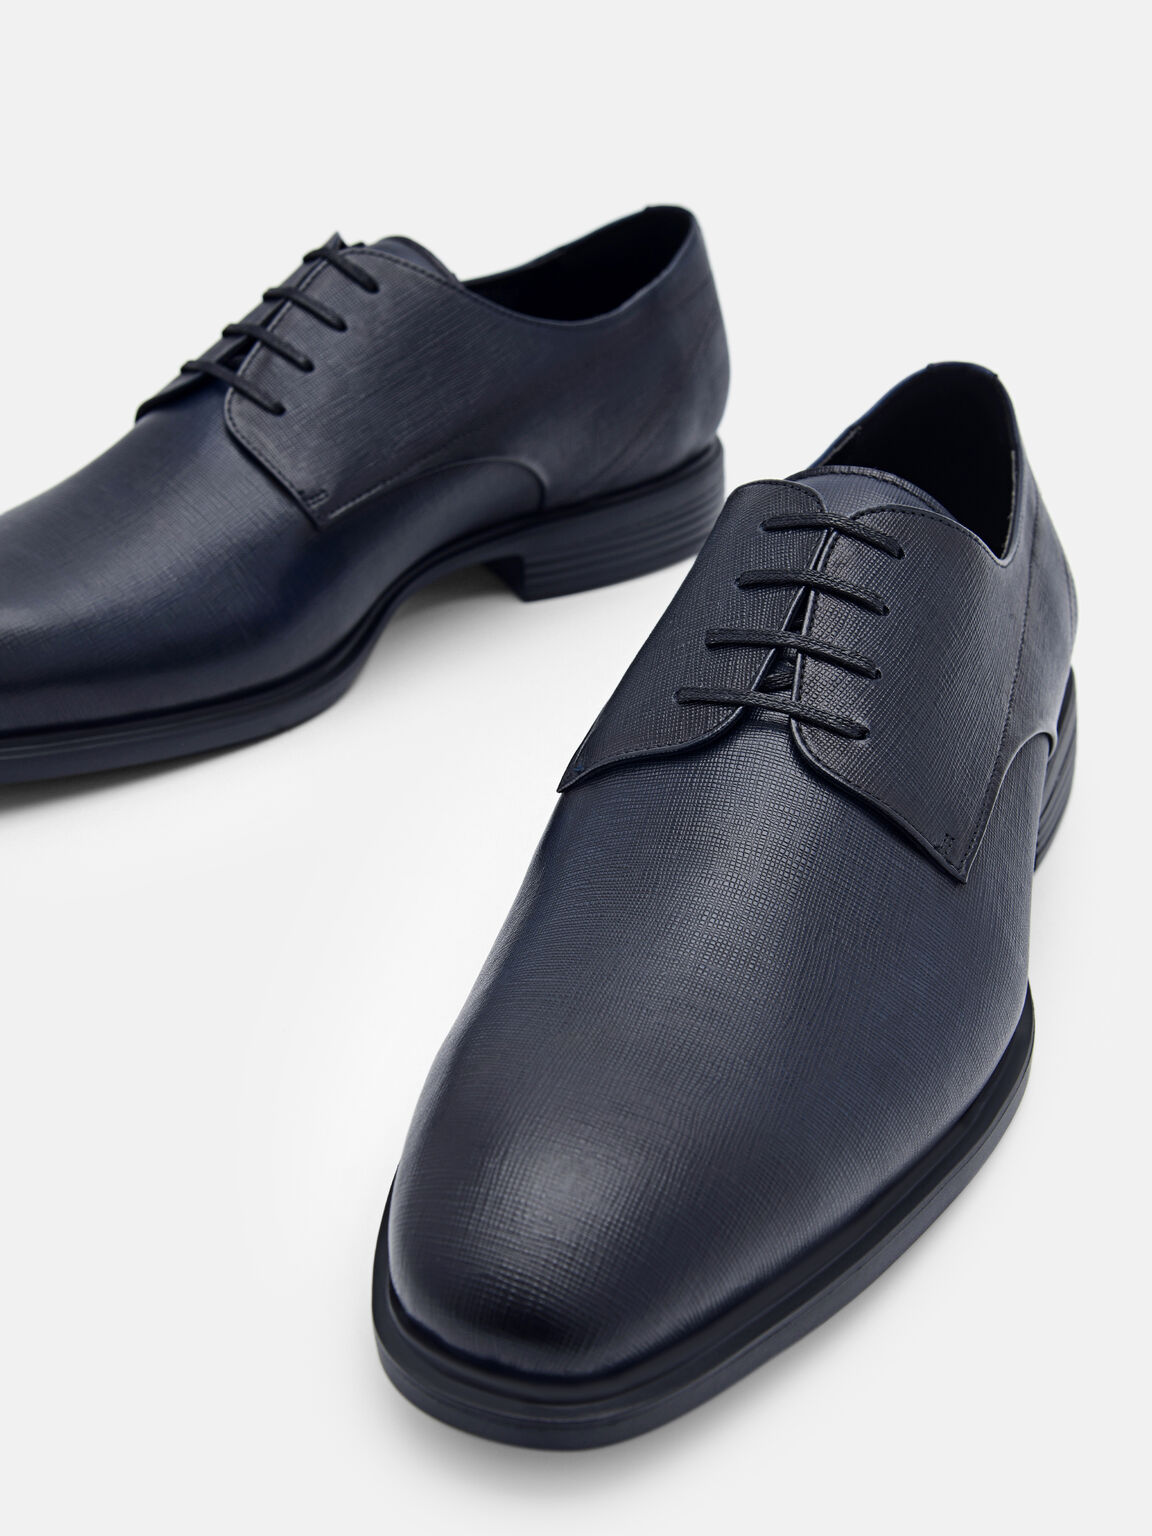 Altitude Lightweight Leather Derby Shoes, Navy